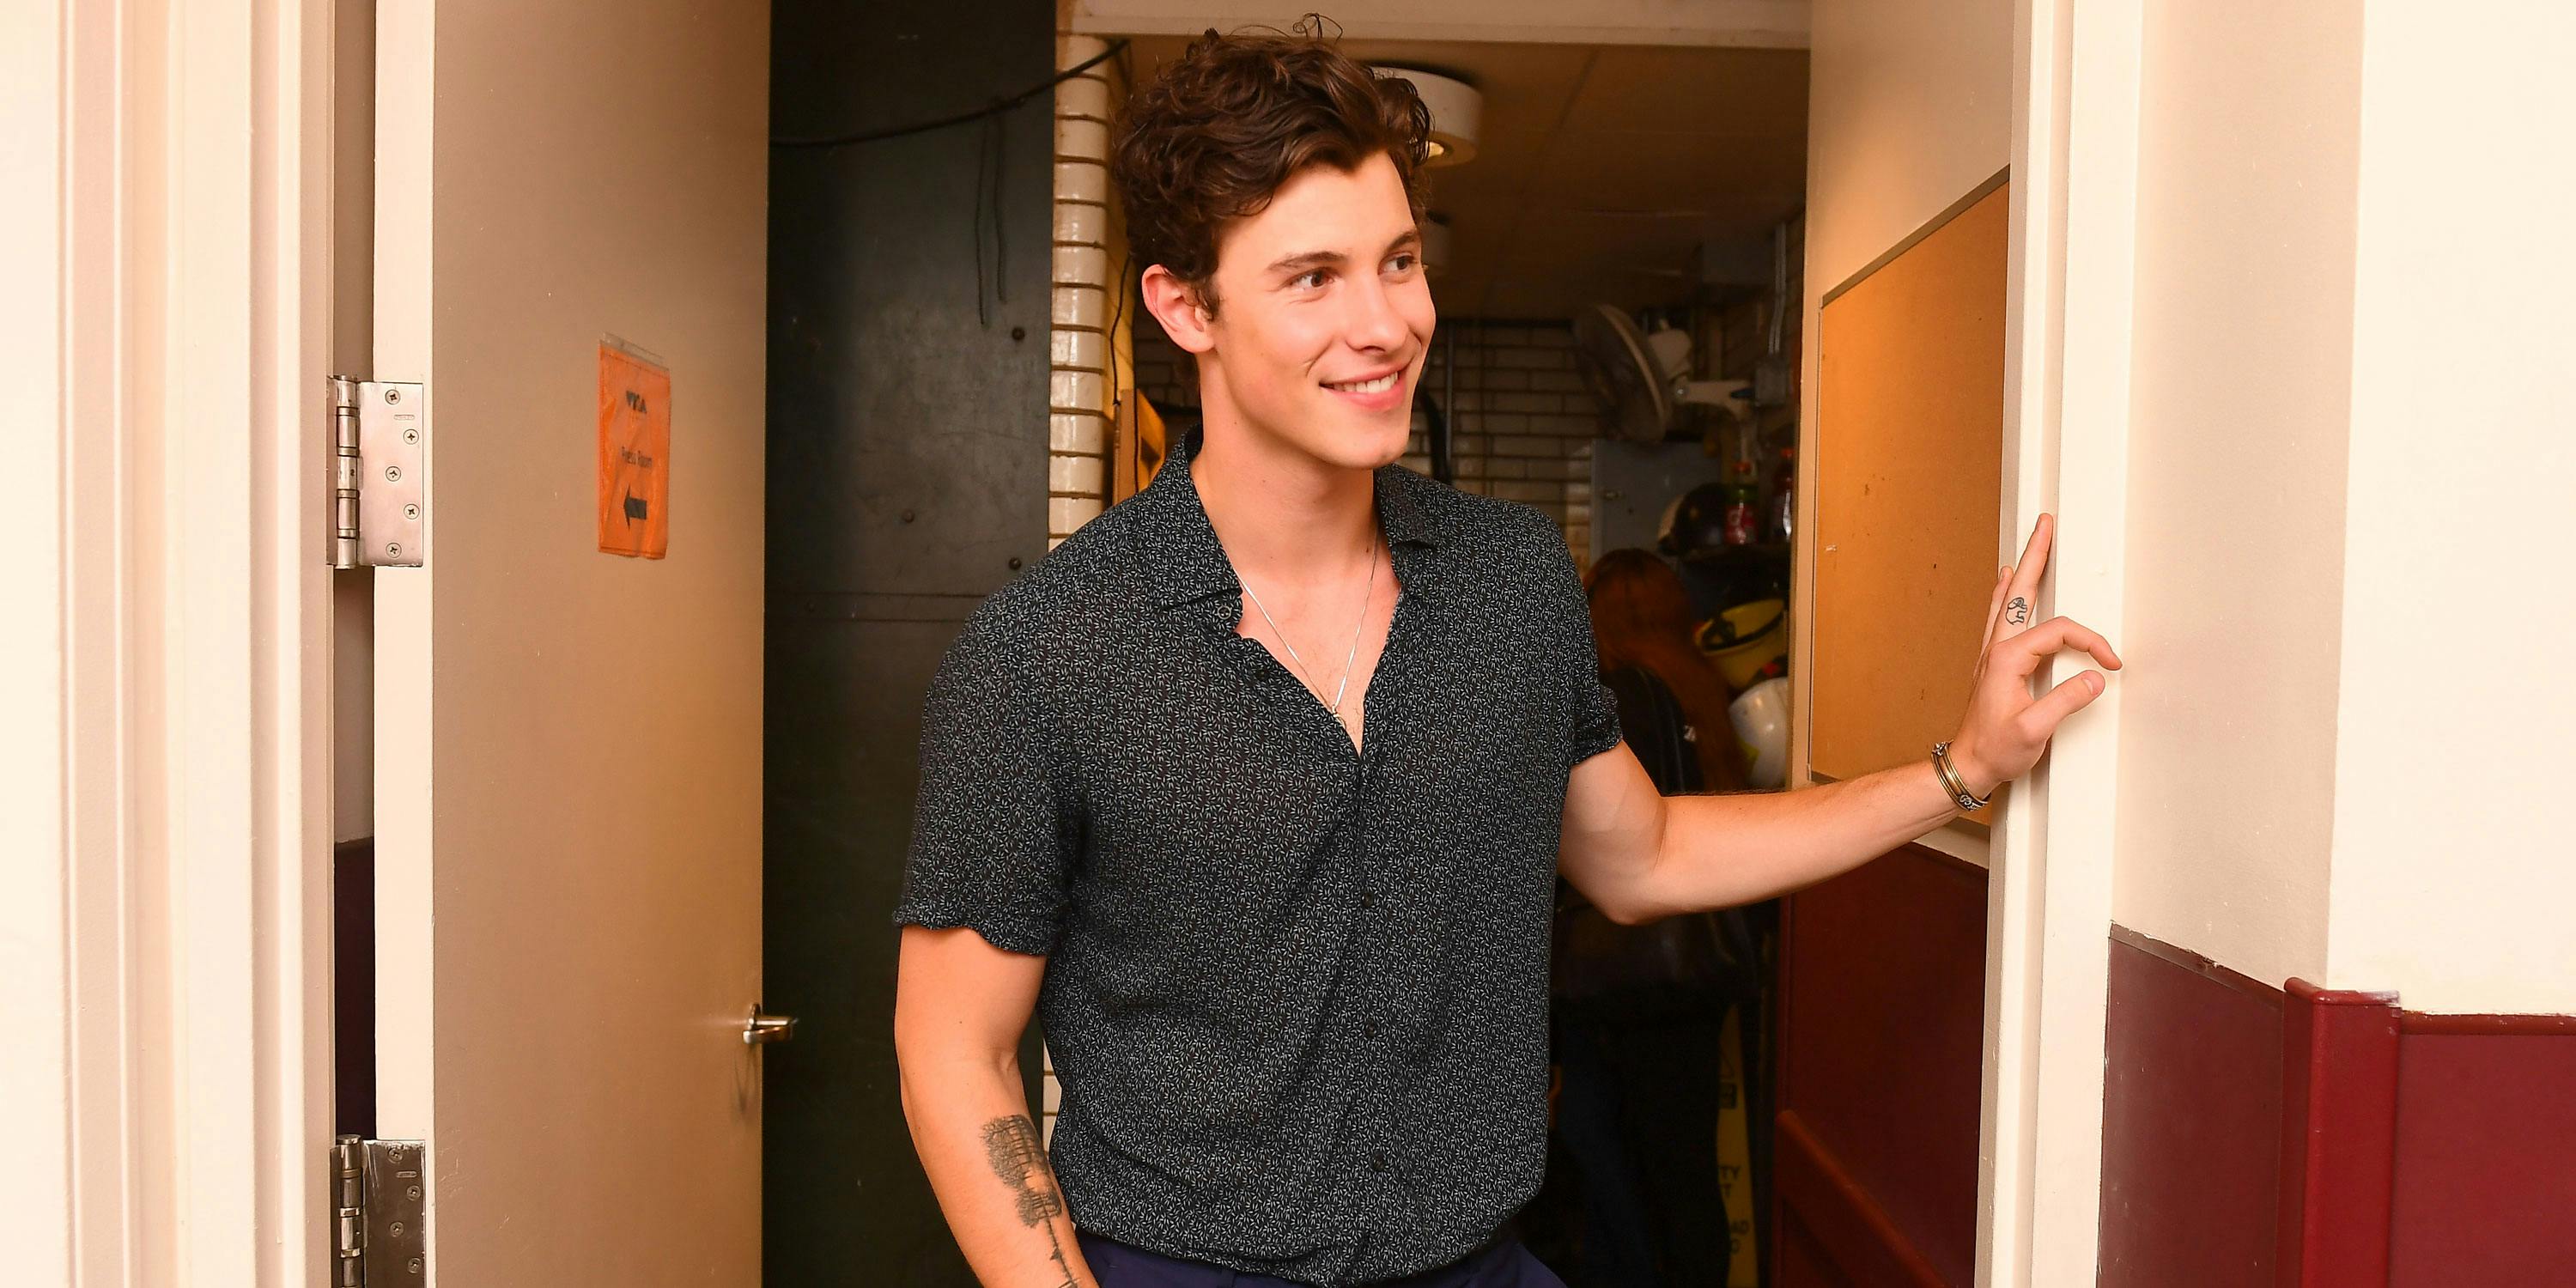 Shawn Mendes poses backstage during the 2018 MTV Video Music Awards at Radio City Music Hall on August 20, 2018 in New York City. He spoke with a reporter before the MMVAs about the best music for smoking weed. (Photo by Nicholas Hunt/VMN18/Getty Images)